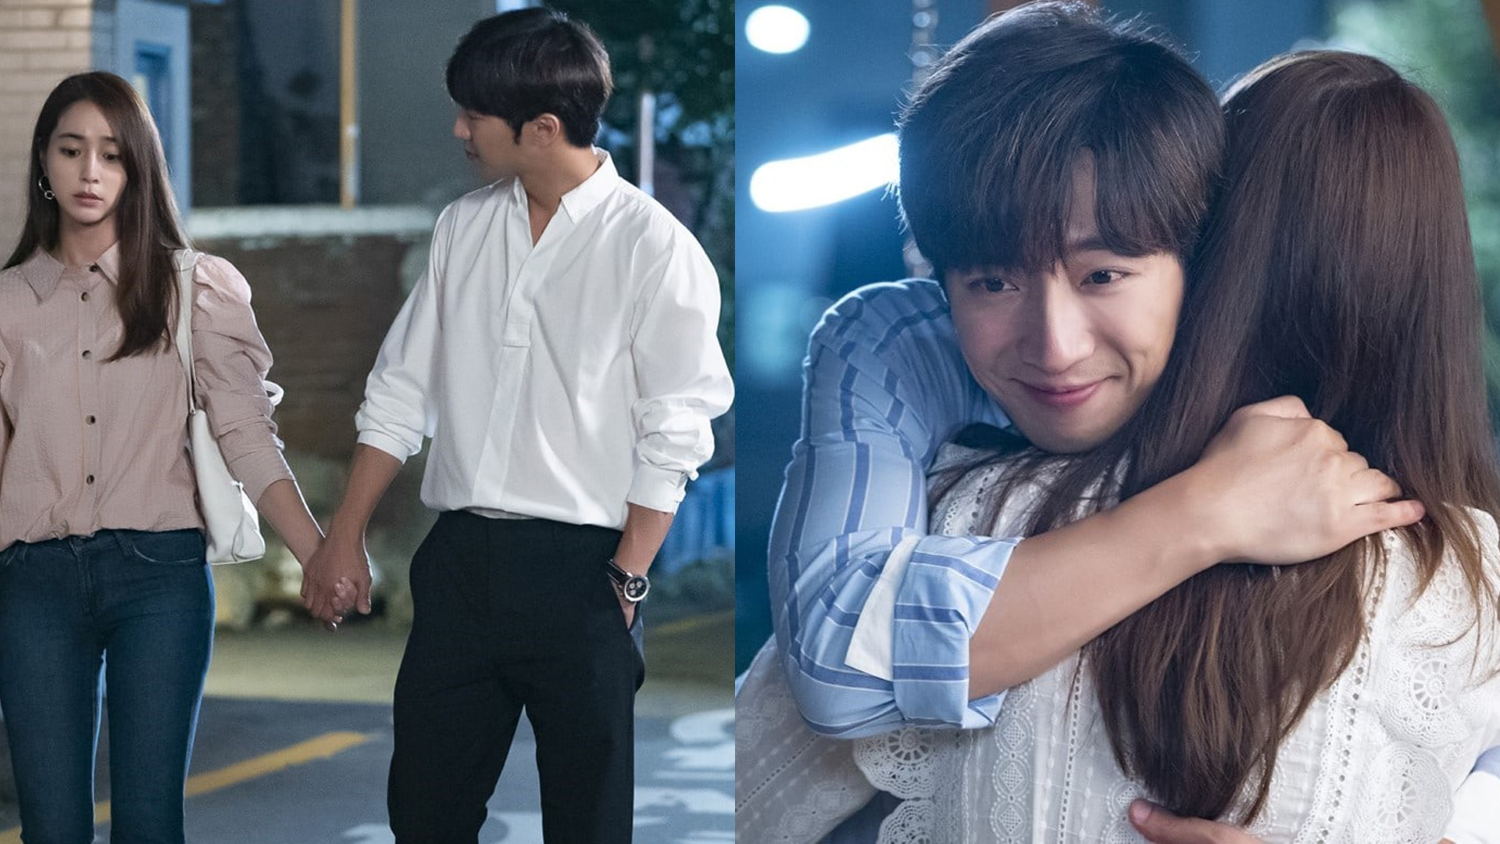 Lee Min Jung and Lee Sang Yeob eventually meet again [Once Again Ep 62] 